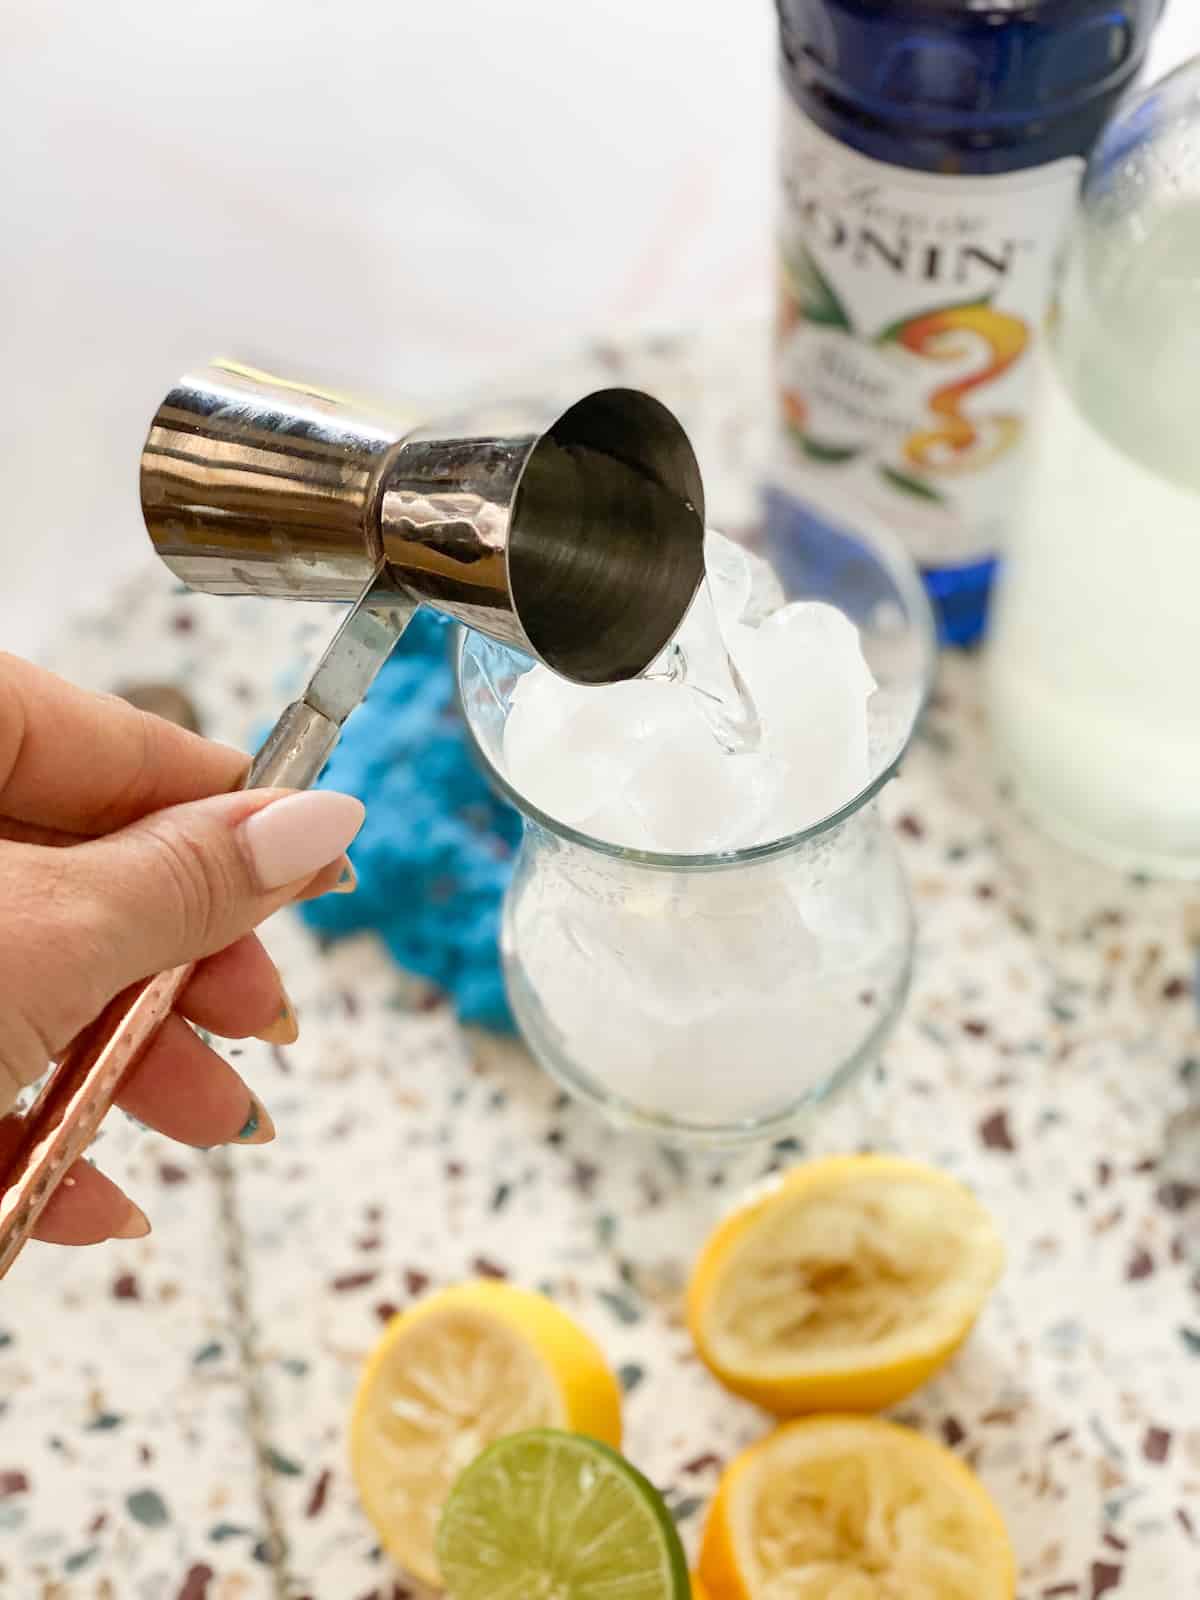 What is a mocktail? Hand pouring drink ingredient into a cup.